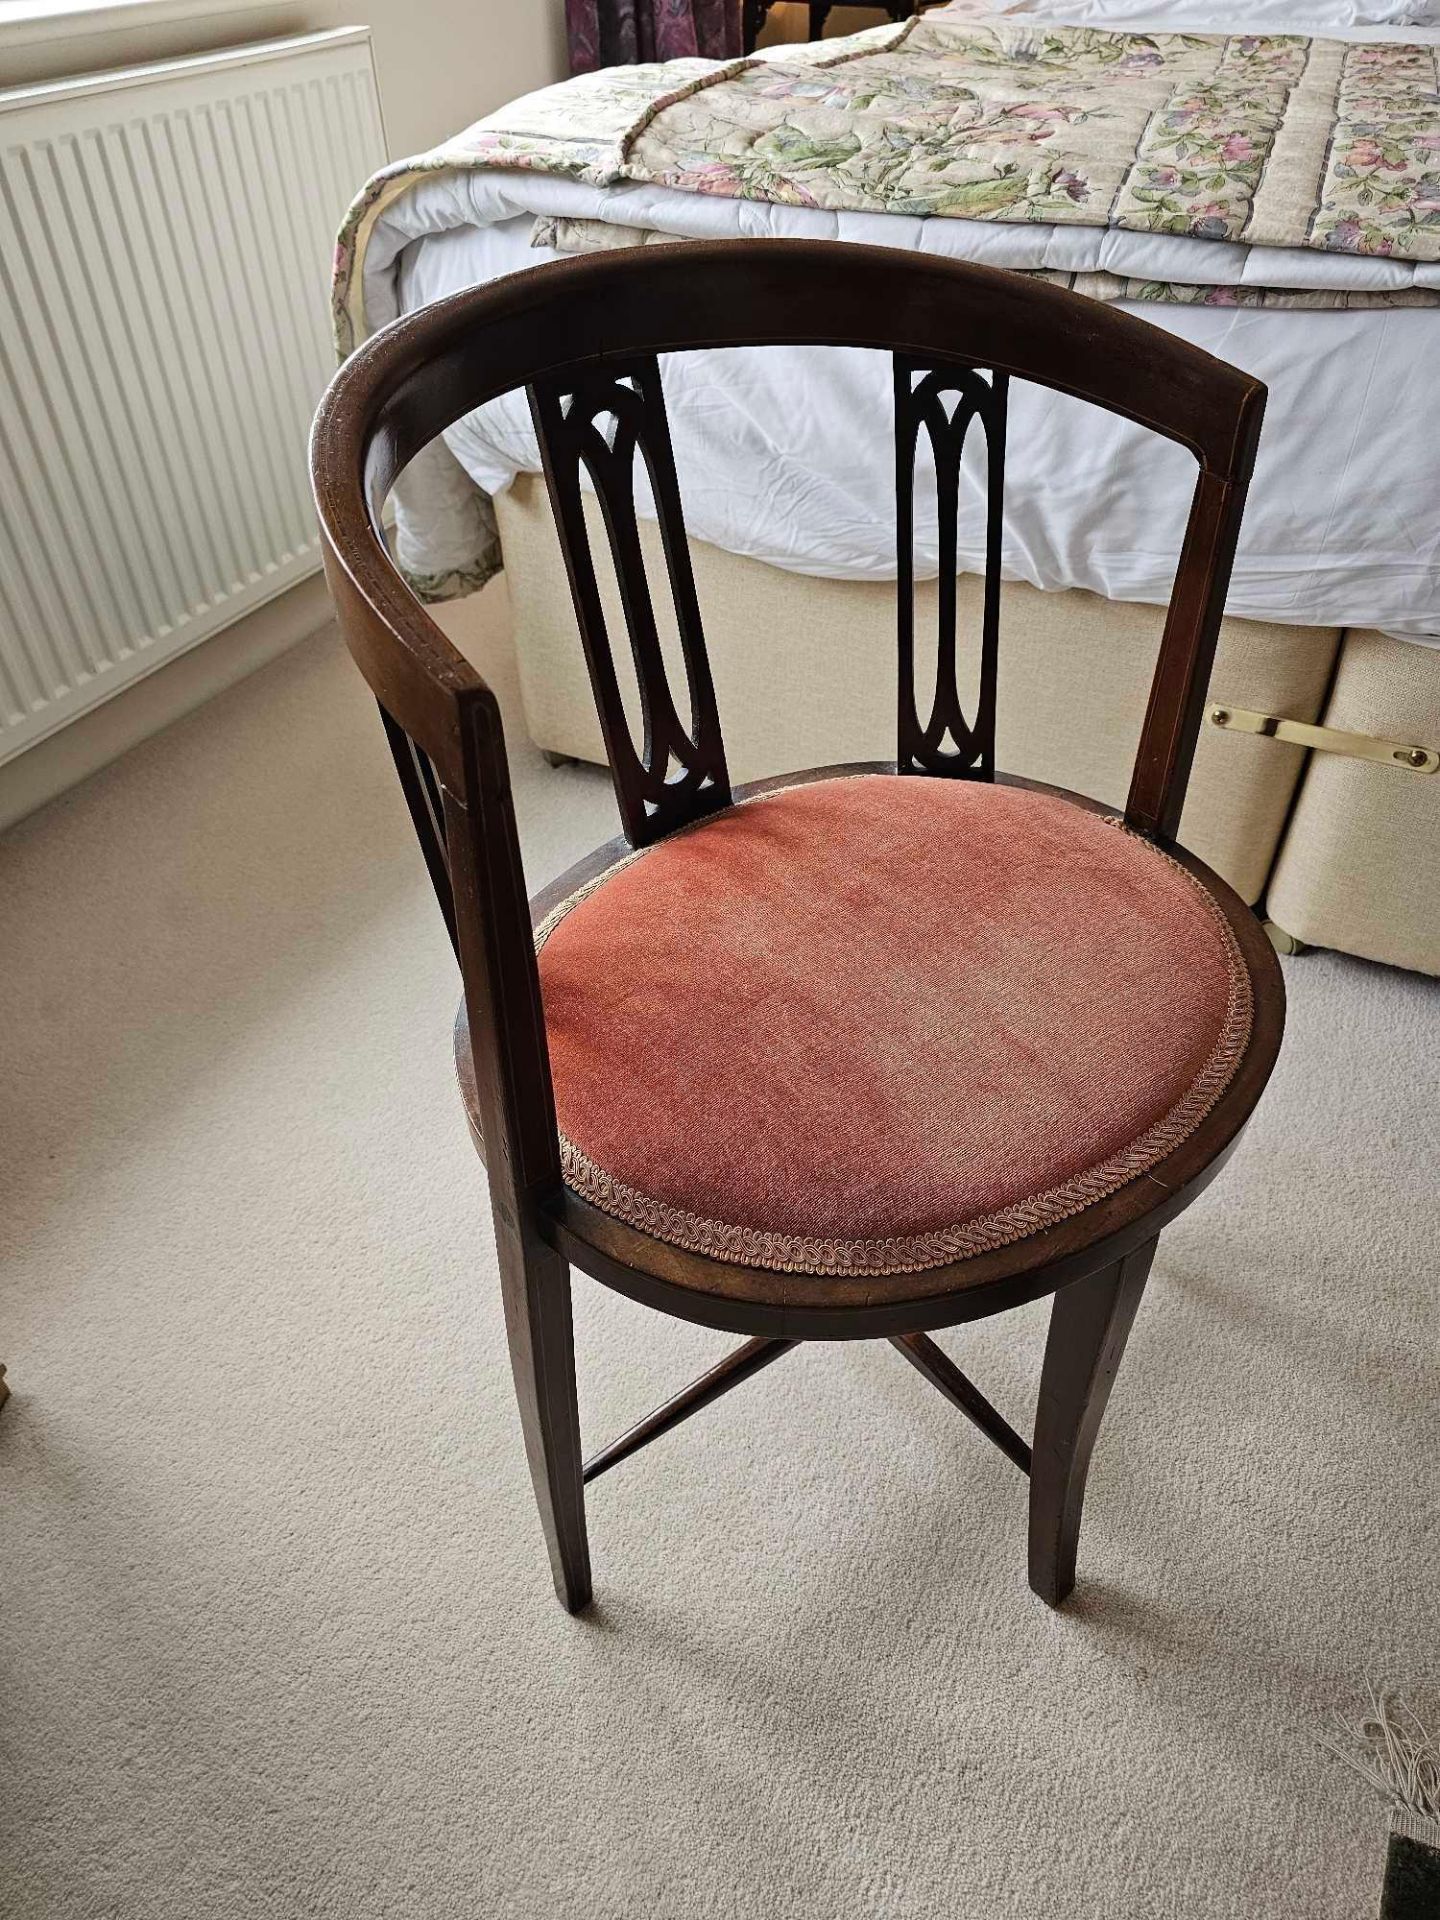 An Edwardian Mahogany Tub Chair A Low Easy Chair, With A Rounded Splat Panel Back, Padded Shaped - Image 3 of 5